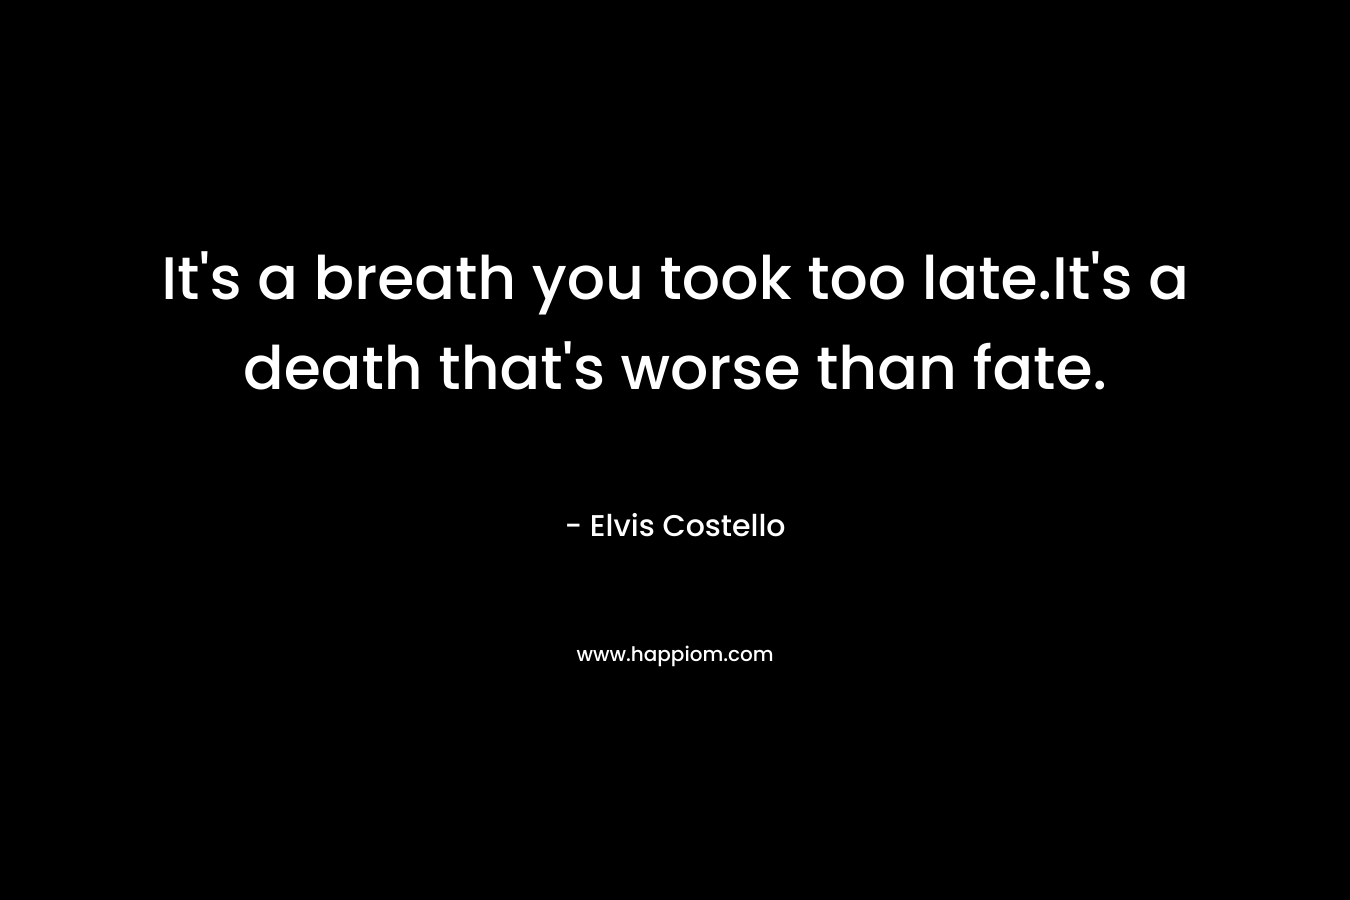 It's a breath you took too late.It's a death that's worse than fate.